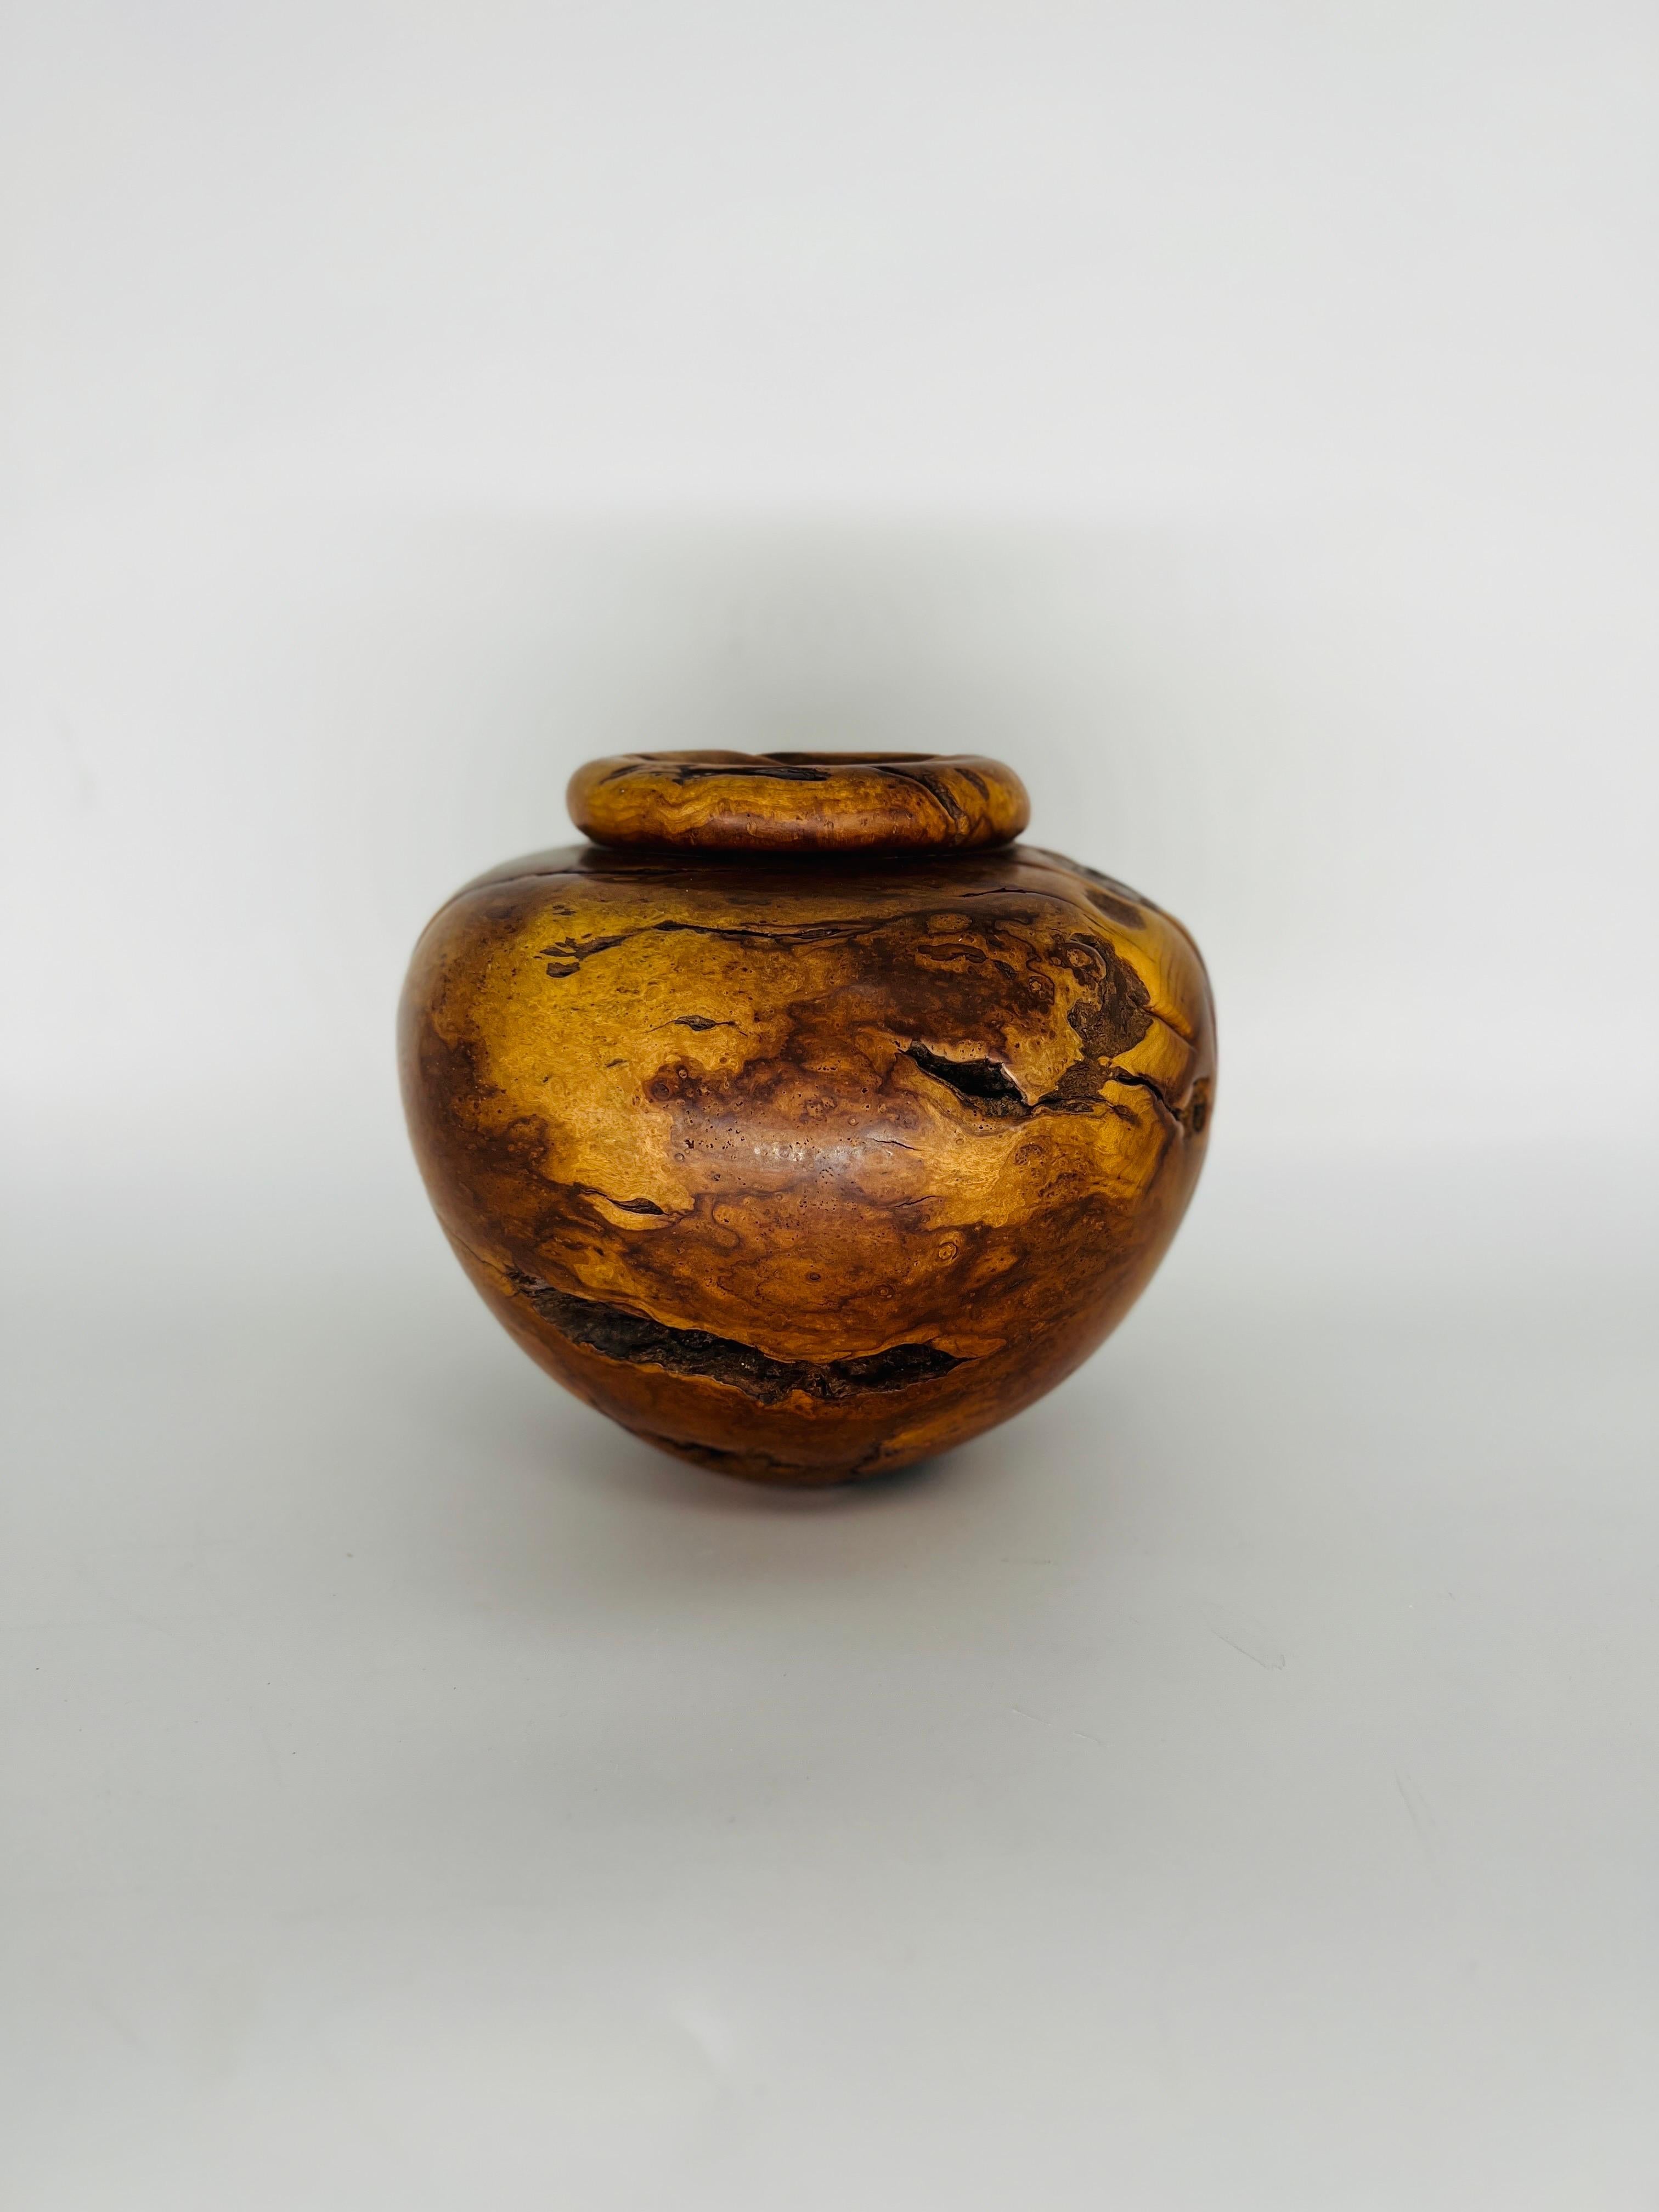 Melvin Lindquist (American, 1911-2000) Beautiful turned vase in Cherry burl with natural occlusions. Signed 2-82 Cherry Burl. 

Melvin Lindquist began turning in the 1930s as a vertical turret lathe operator for the General Electric Company. In